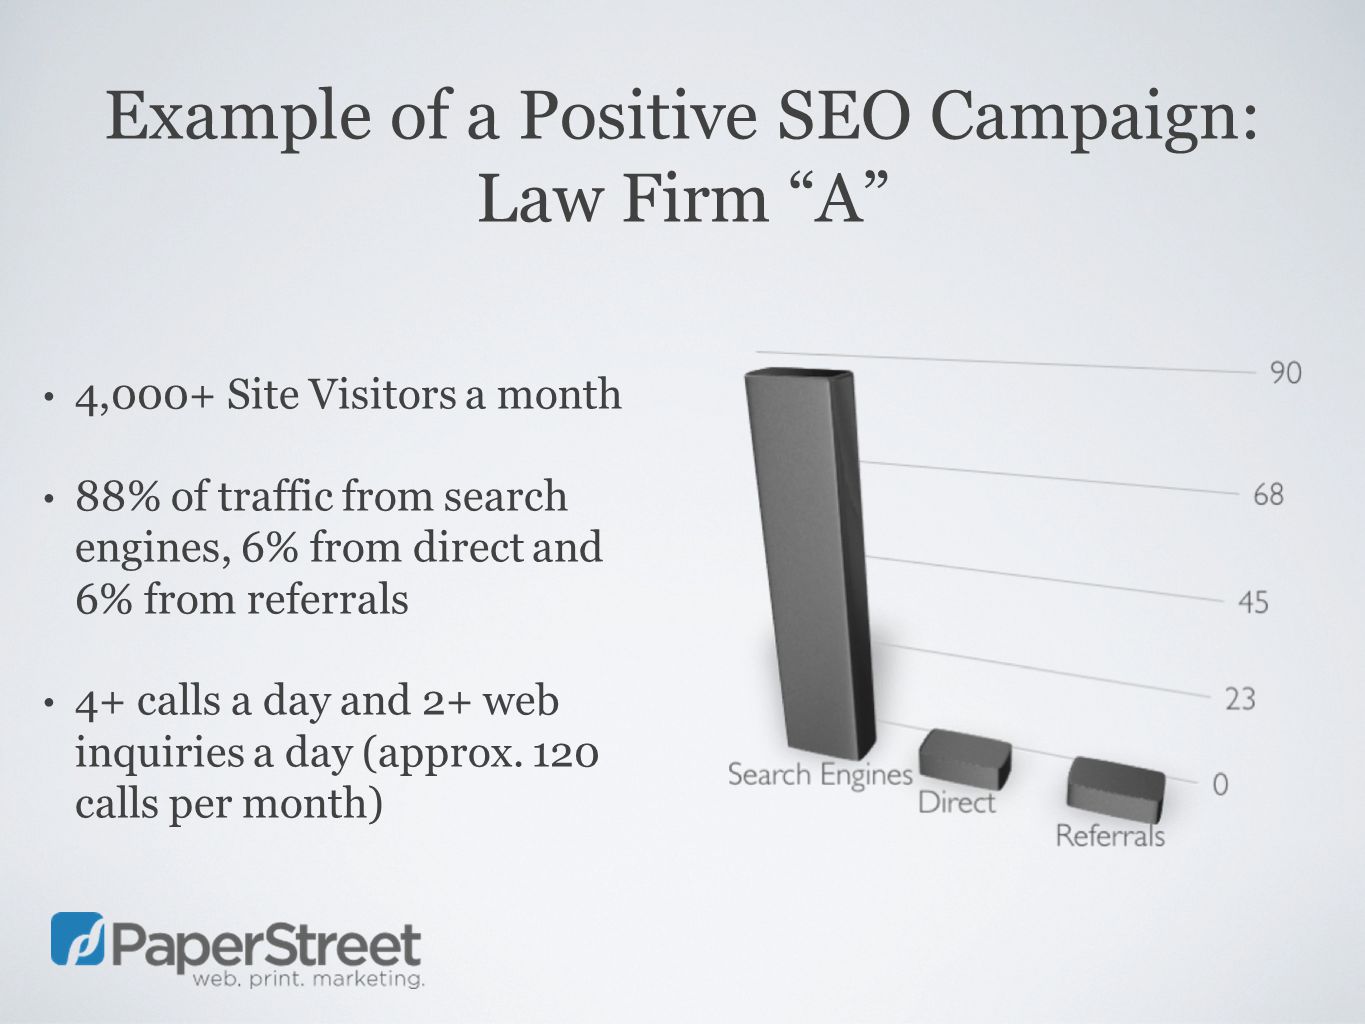 Example of a Positive SEO Campaign: Law Firm A 4,000+ Site Visitors a month 88% of traffic from search engines, 6% from direct and 6% from referrals 4+ calls a day and 2+ web inquiries a day (approx.